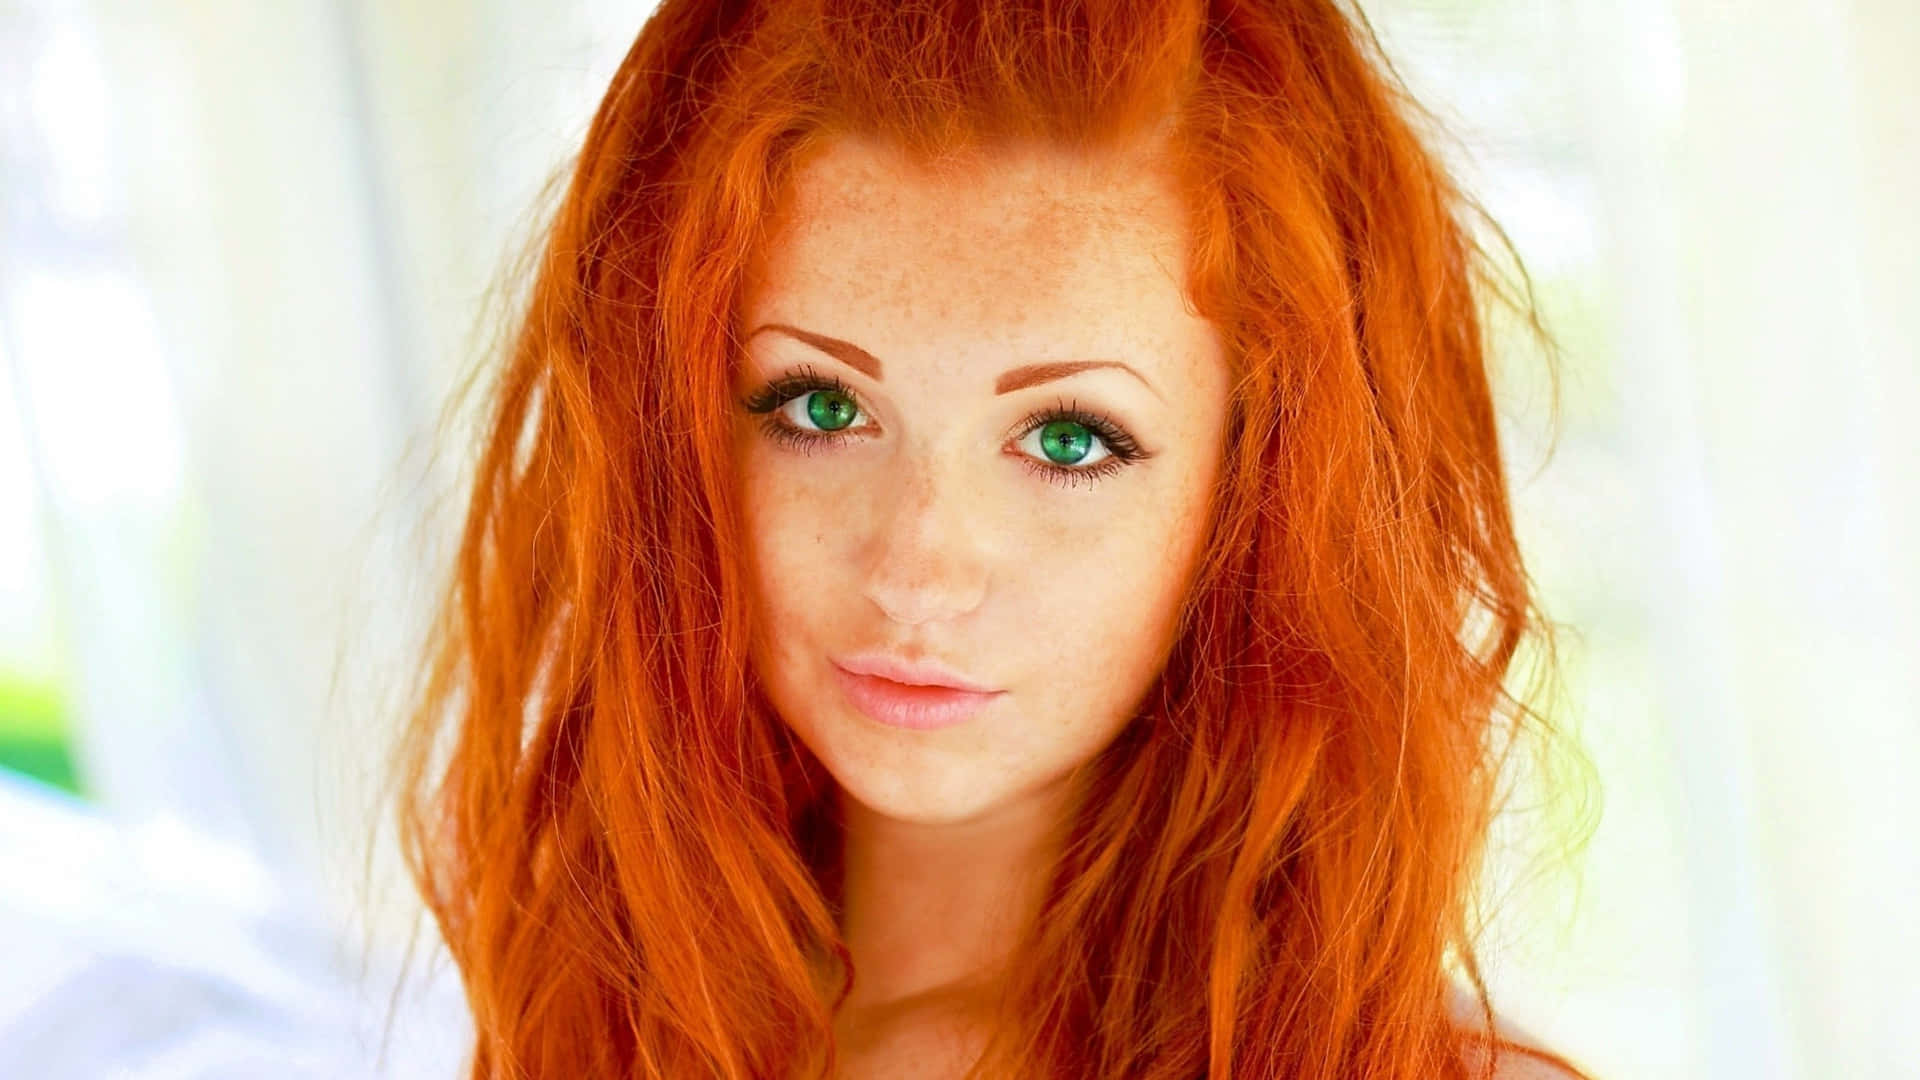 Redhead Girl With Green Eyes Wallpaper